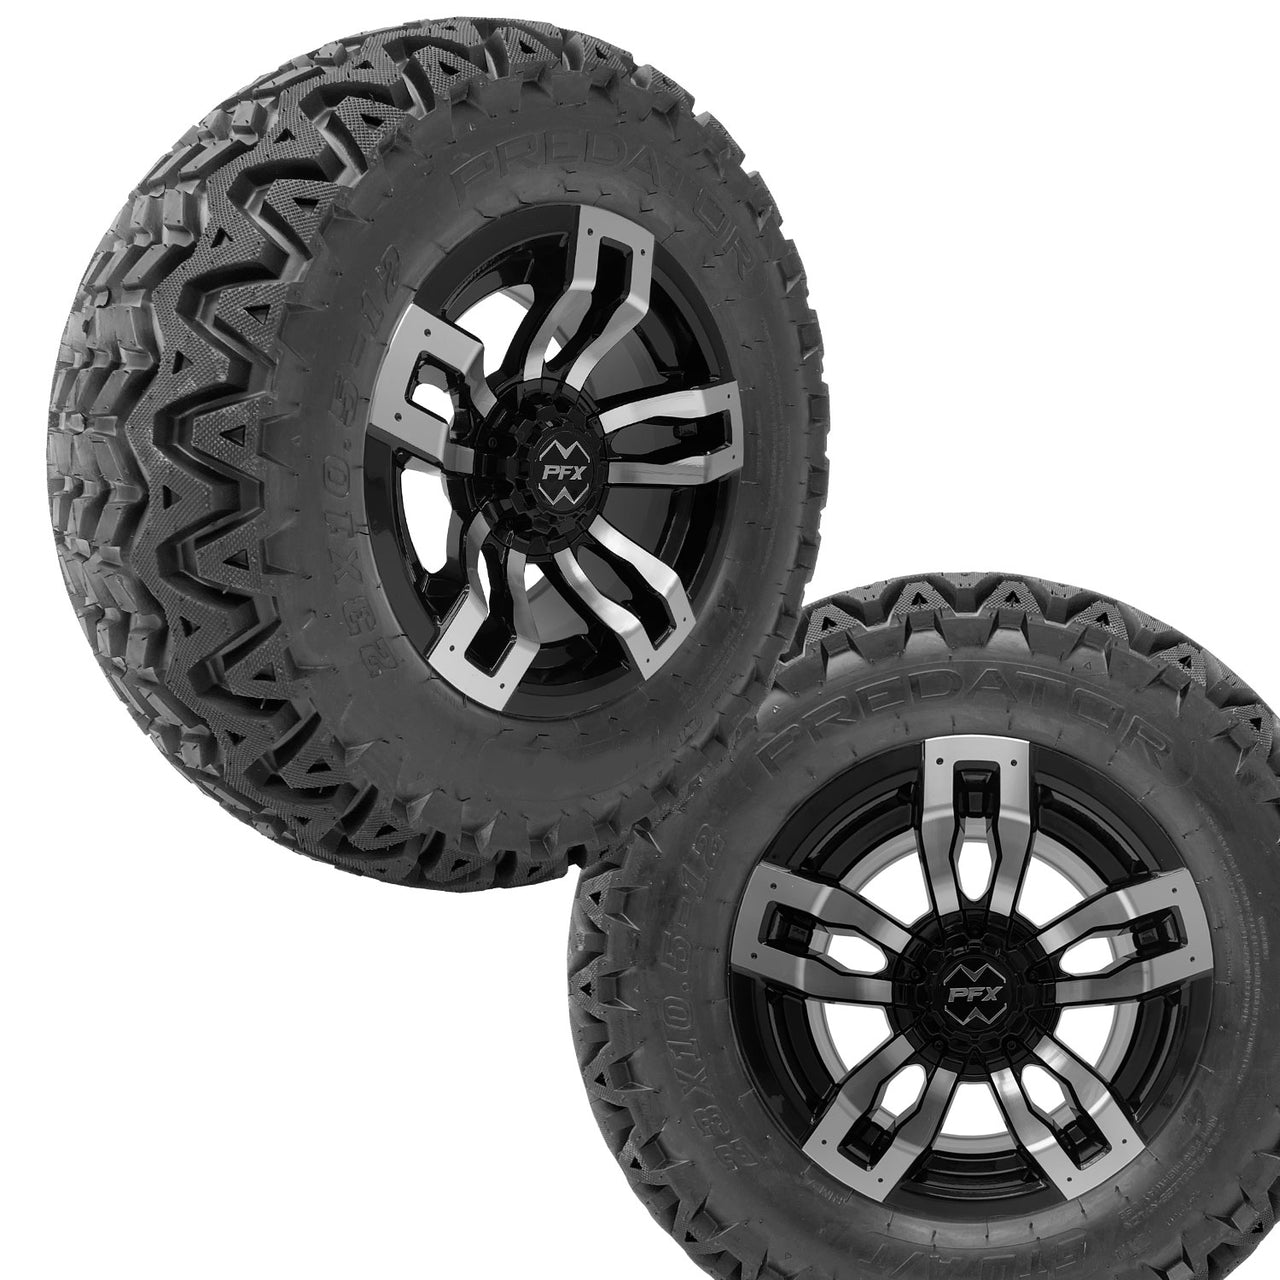 12" Velocity Machined/Black Wheels on 23x10x12 A/T Tires (Set of 4)